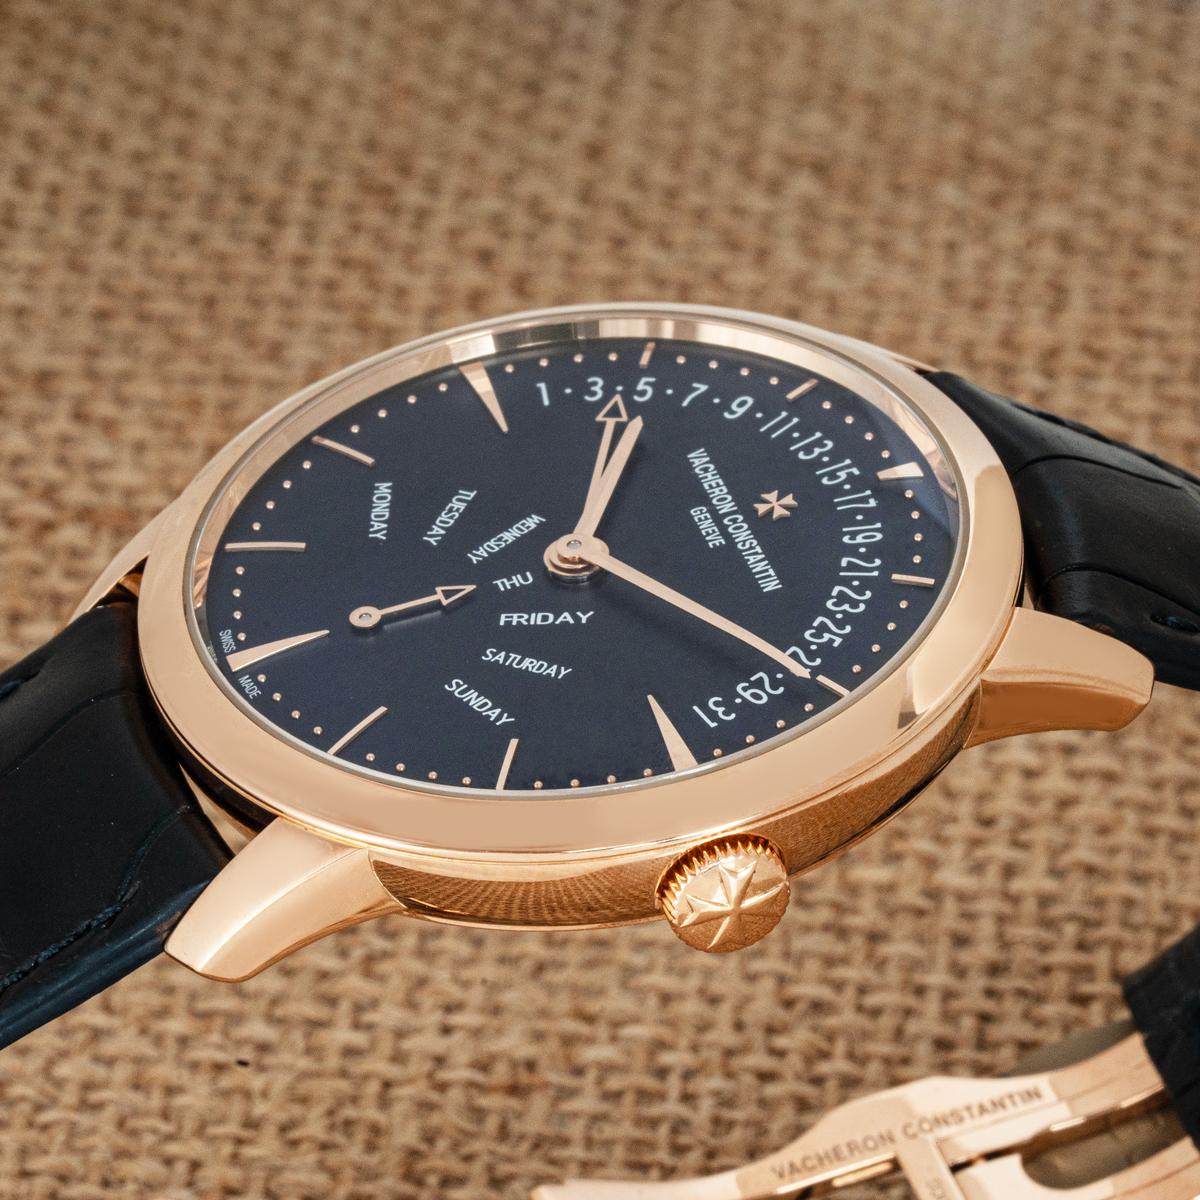 A 42mm Vacheron Constantin Patrimony Retrograde Day-Date in rose gold. Features a distinct sunburst blue dial with a retrograde hand, and a day and date display. Fitted with sapphire crystal and a self-winding automatic movement which can be admired